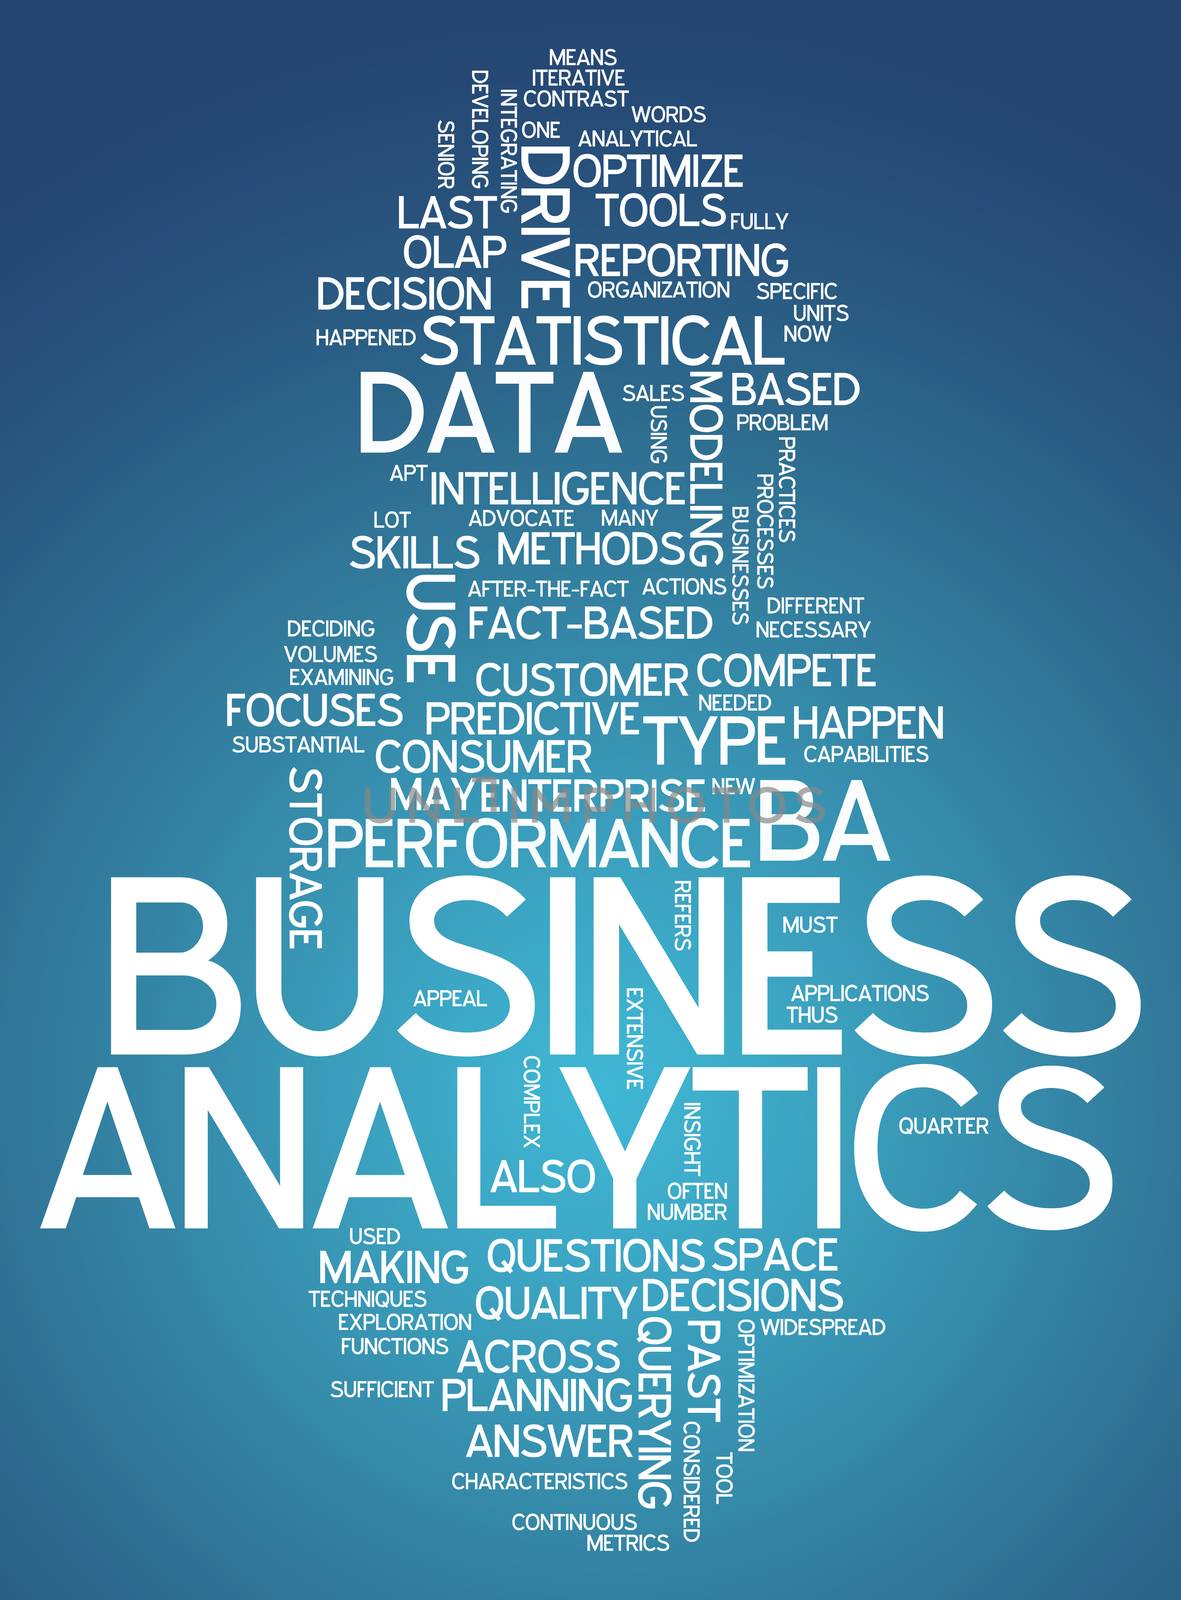 Word Cloud "Business Analytics" by mindscanner